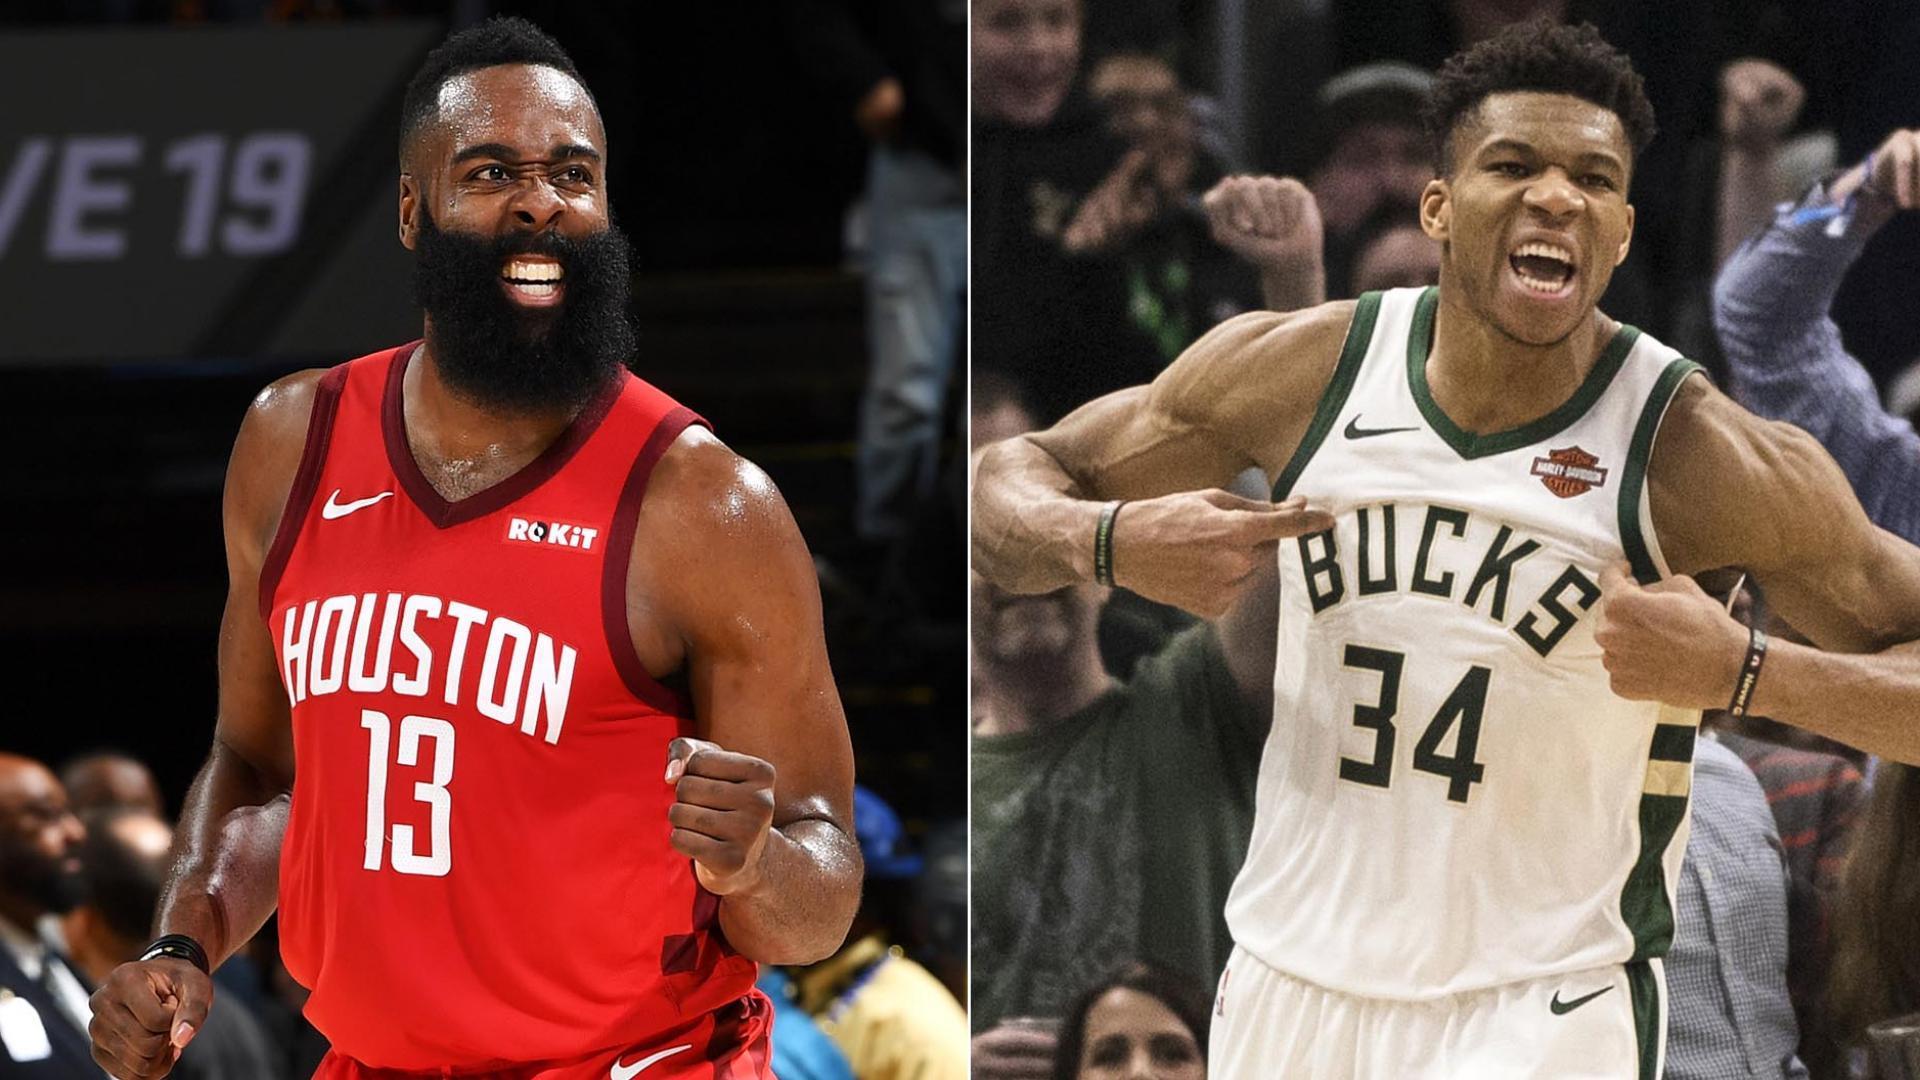 Top Plays from James Harden and Giannis Antetokounmpo